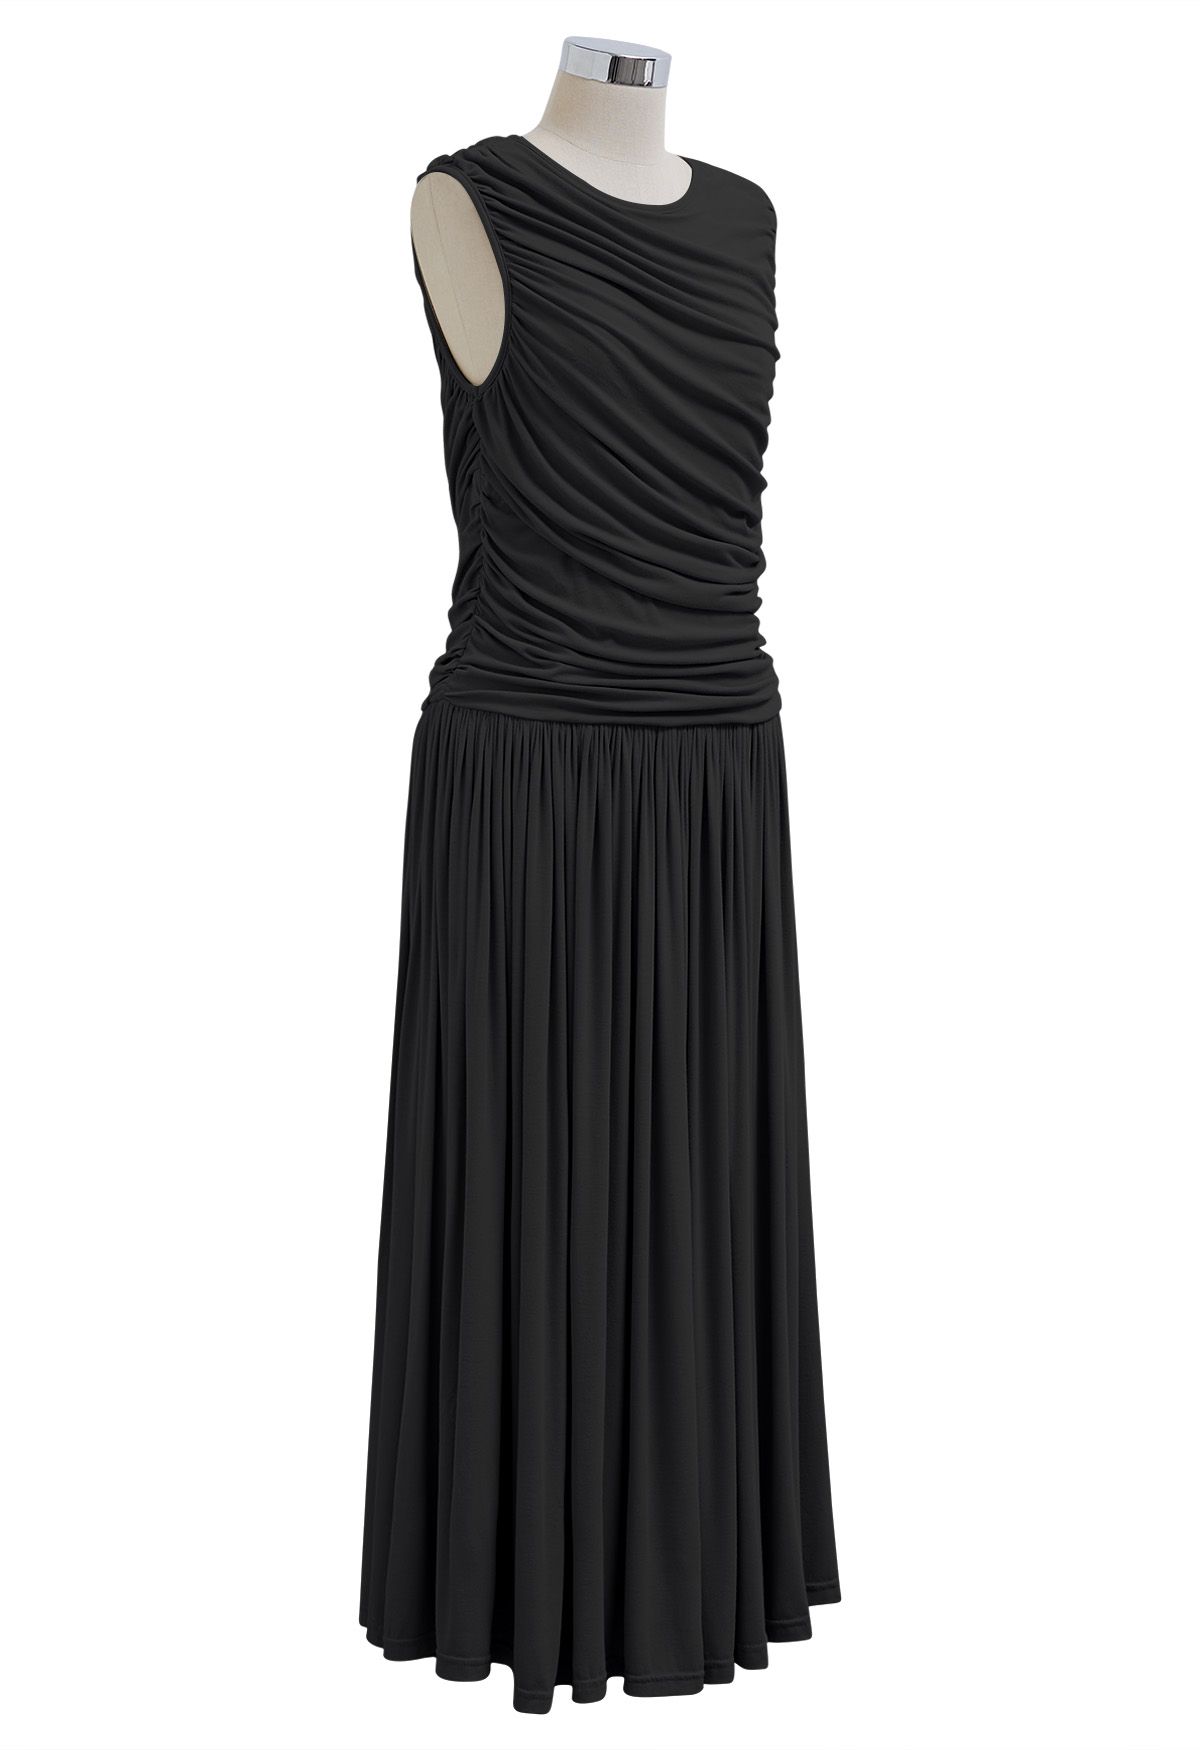 Effortless Ruched Sleeveless Cotton Dress in Black